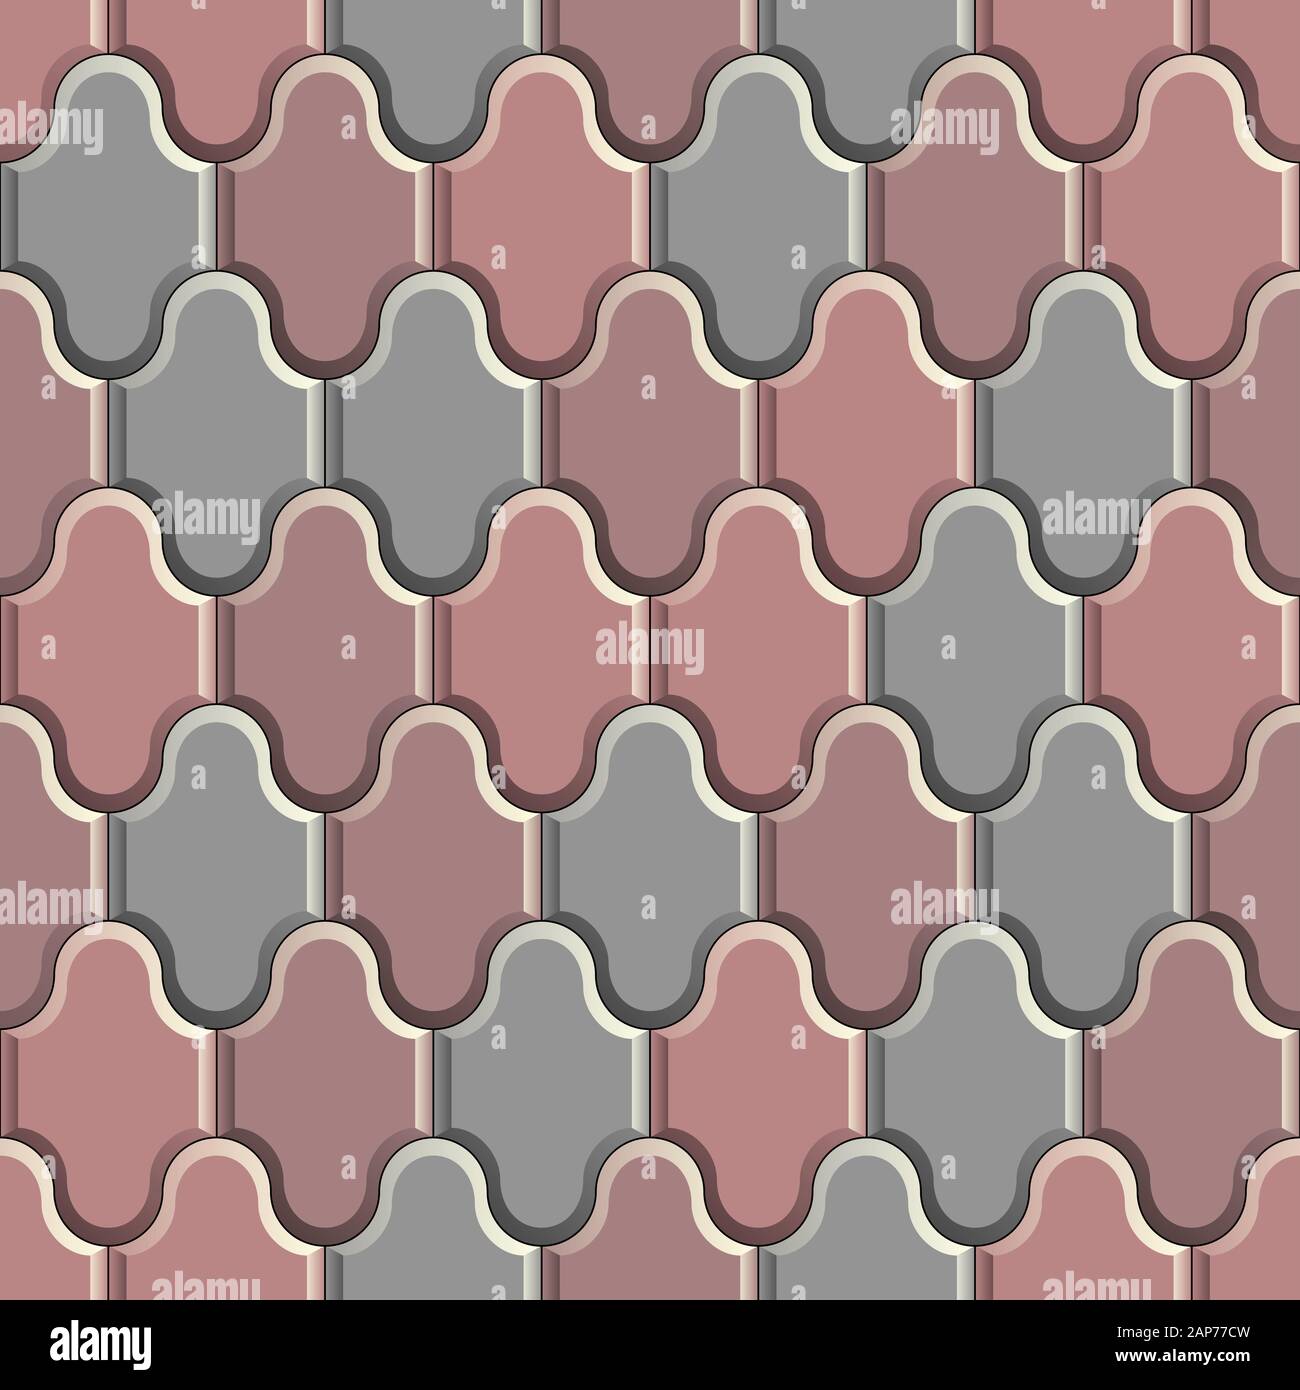 Seamless pattern of red and gray concrete pavement. 3D repeating background with waves tiles pattern Stock Photo